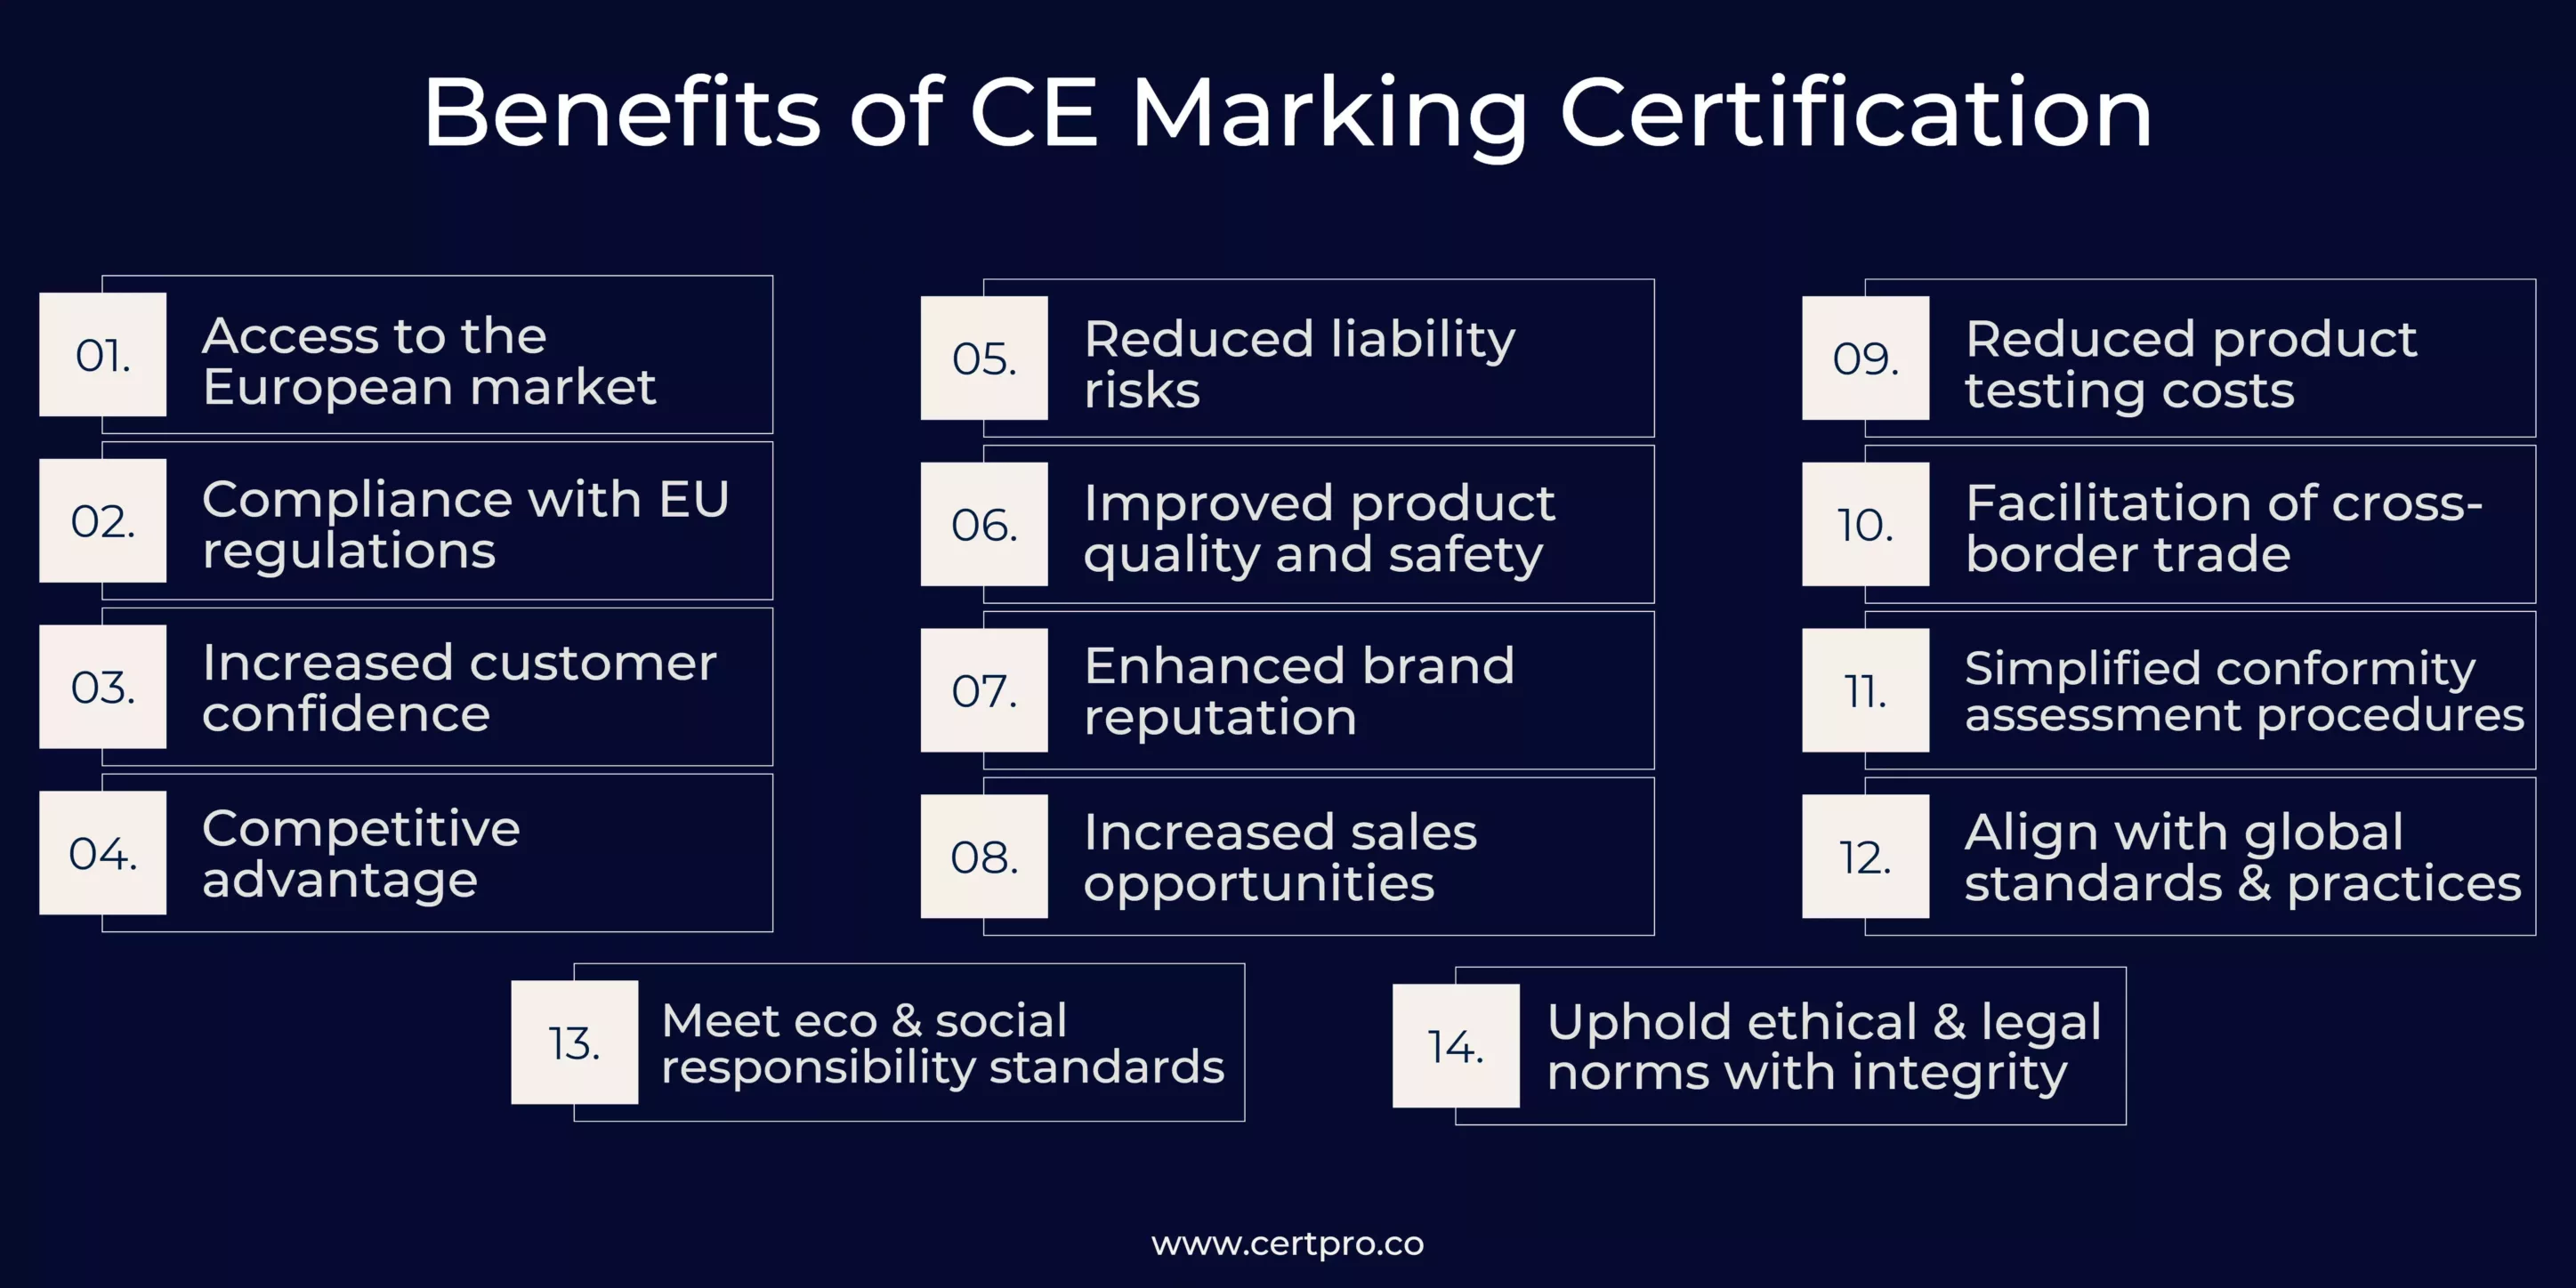 BENEFITS OF CE MARKING